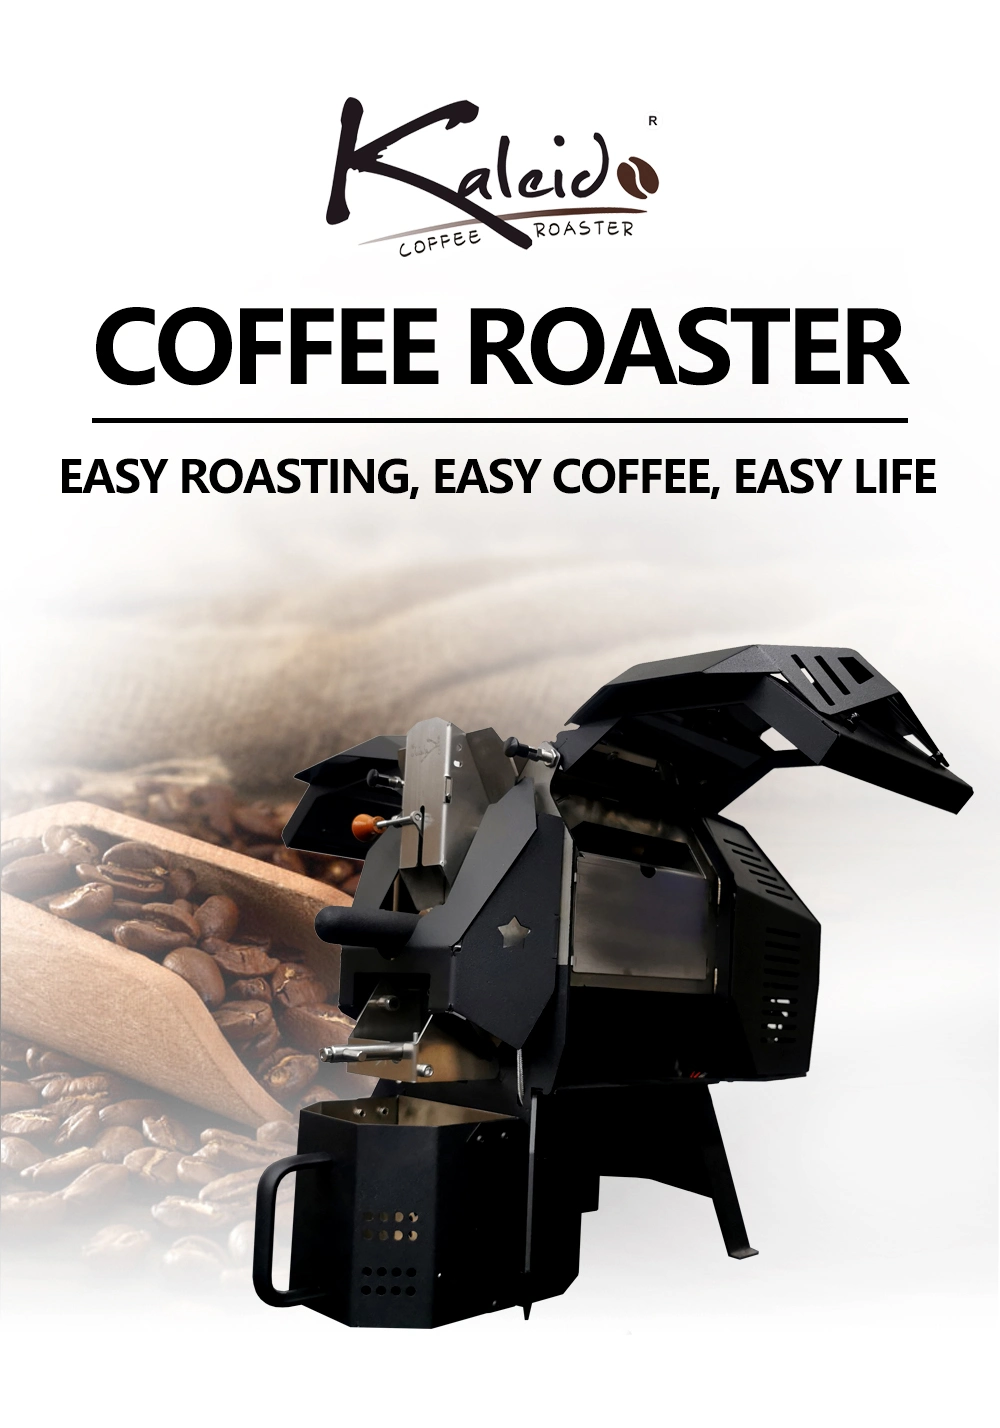 Smart Control Industrial Small Commercial Coffee Roasting Machine Coffee Bean Roaster 400g for Cafe Coffee Shop